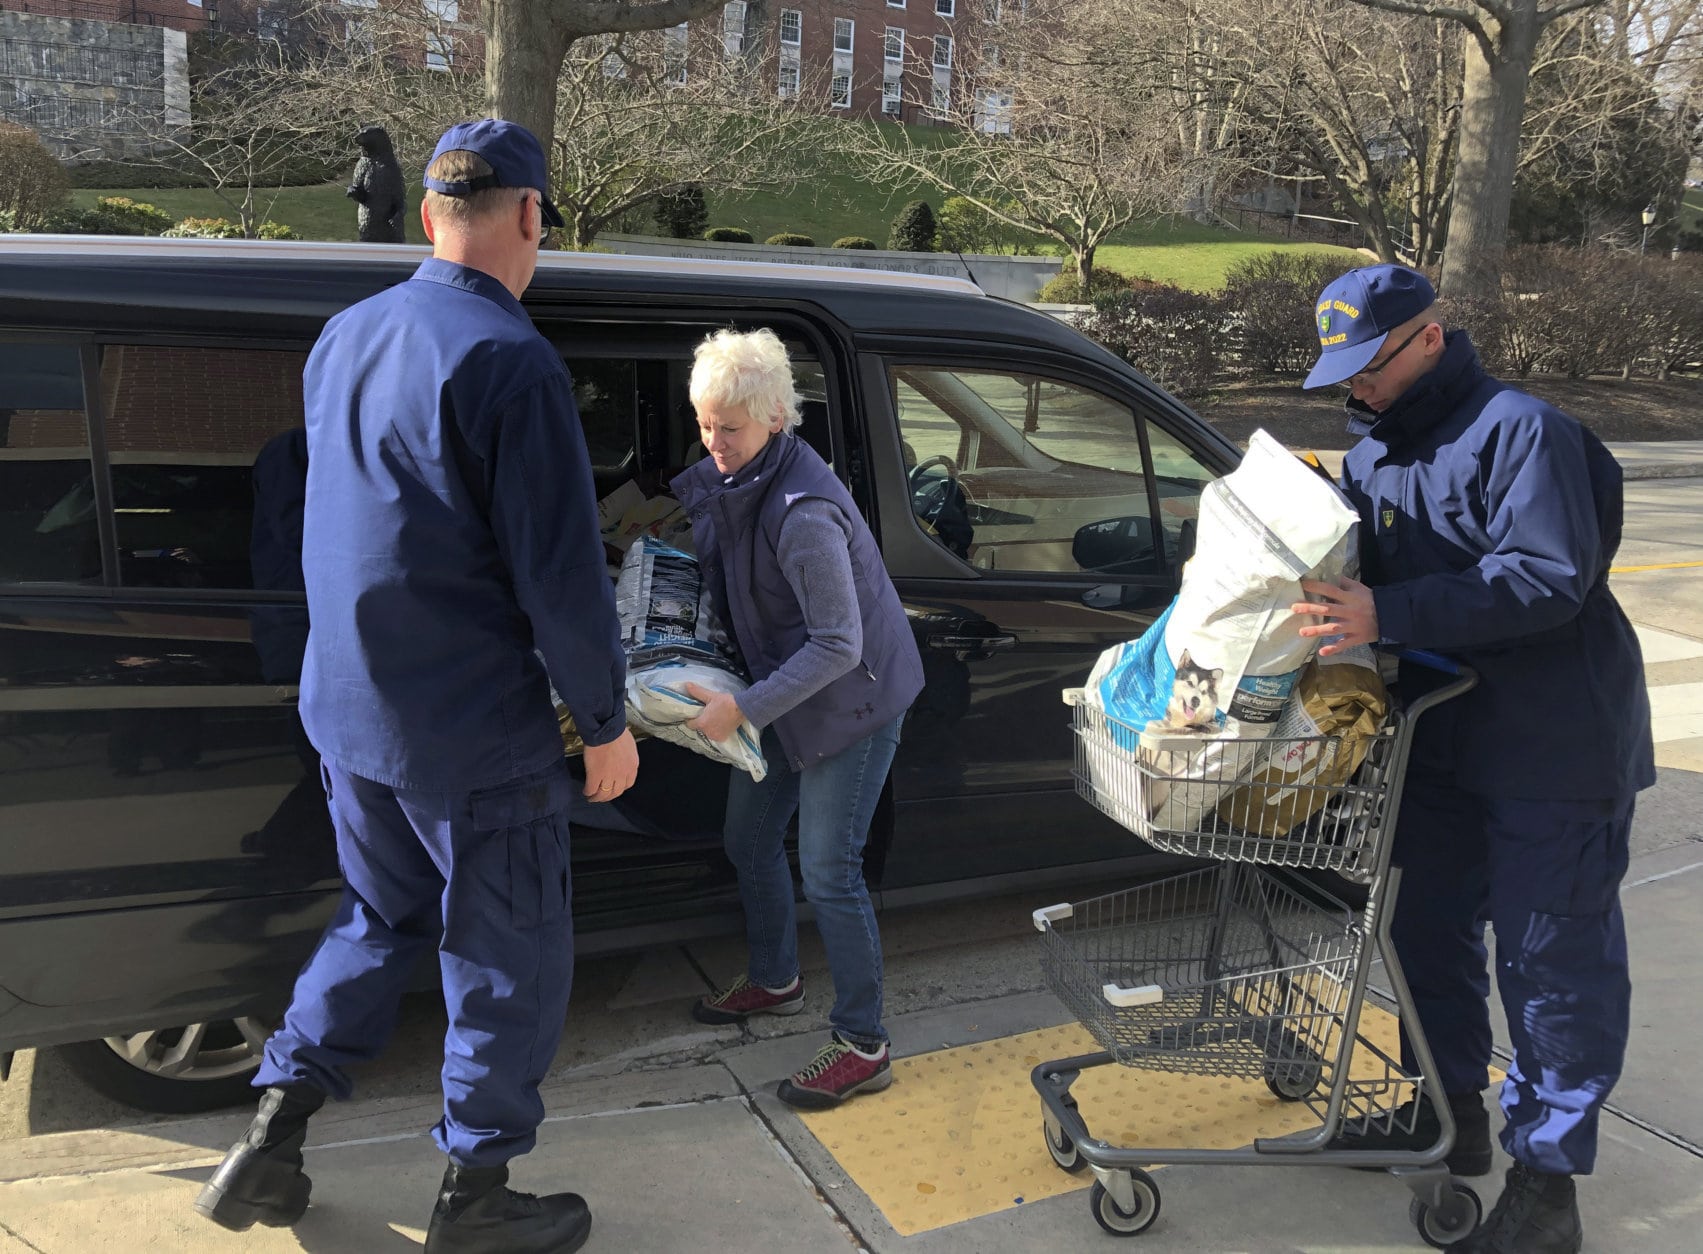 In this Thursday, Jan. 17, 2019 photo, Christine Lamb, president and founder of the nonprofit group Animal House Inc., in nearby Waterford, Conn., delivers bags of donated pet food to Coast Guardsmen helping at a pop-up food pantry created on the grounds of the U.S. Coast Guard Academy in New London, Conn. Hundreds of Coast Guard civilian and non-civilian employees working at the academy and at other Coast Guard installations have been impacted by the partial federal shutdown and have not received a paycheck in weeks. (AP Photo/Susan Haigh)